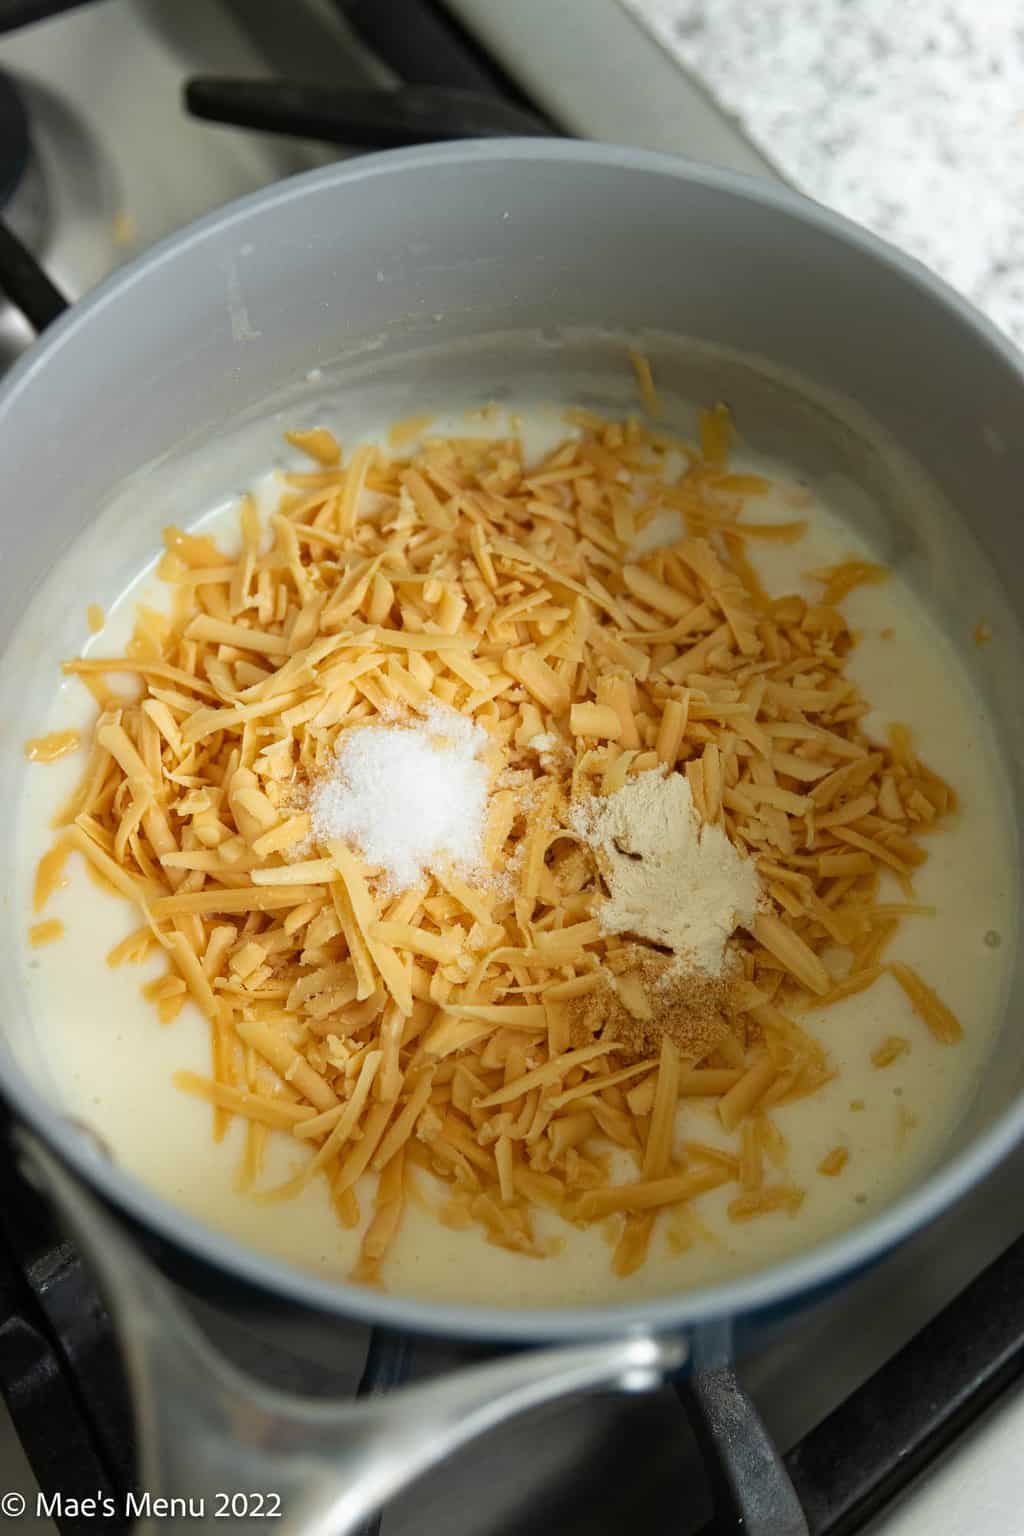 A saucepan with roux, shredded cheese, and seasonings.